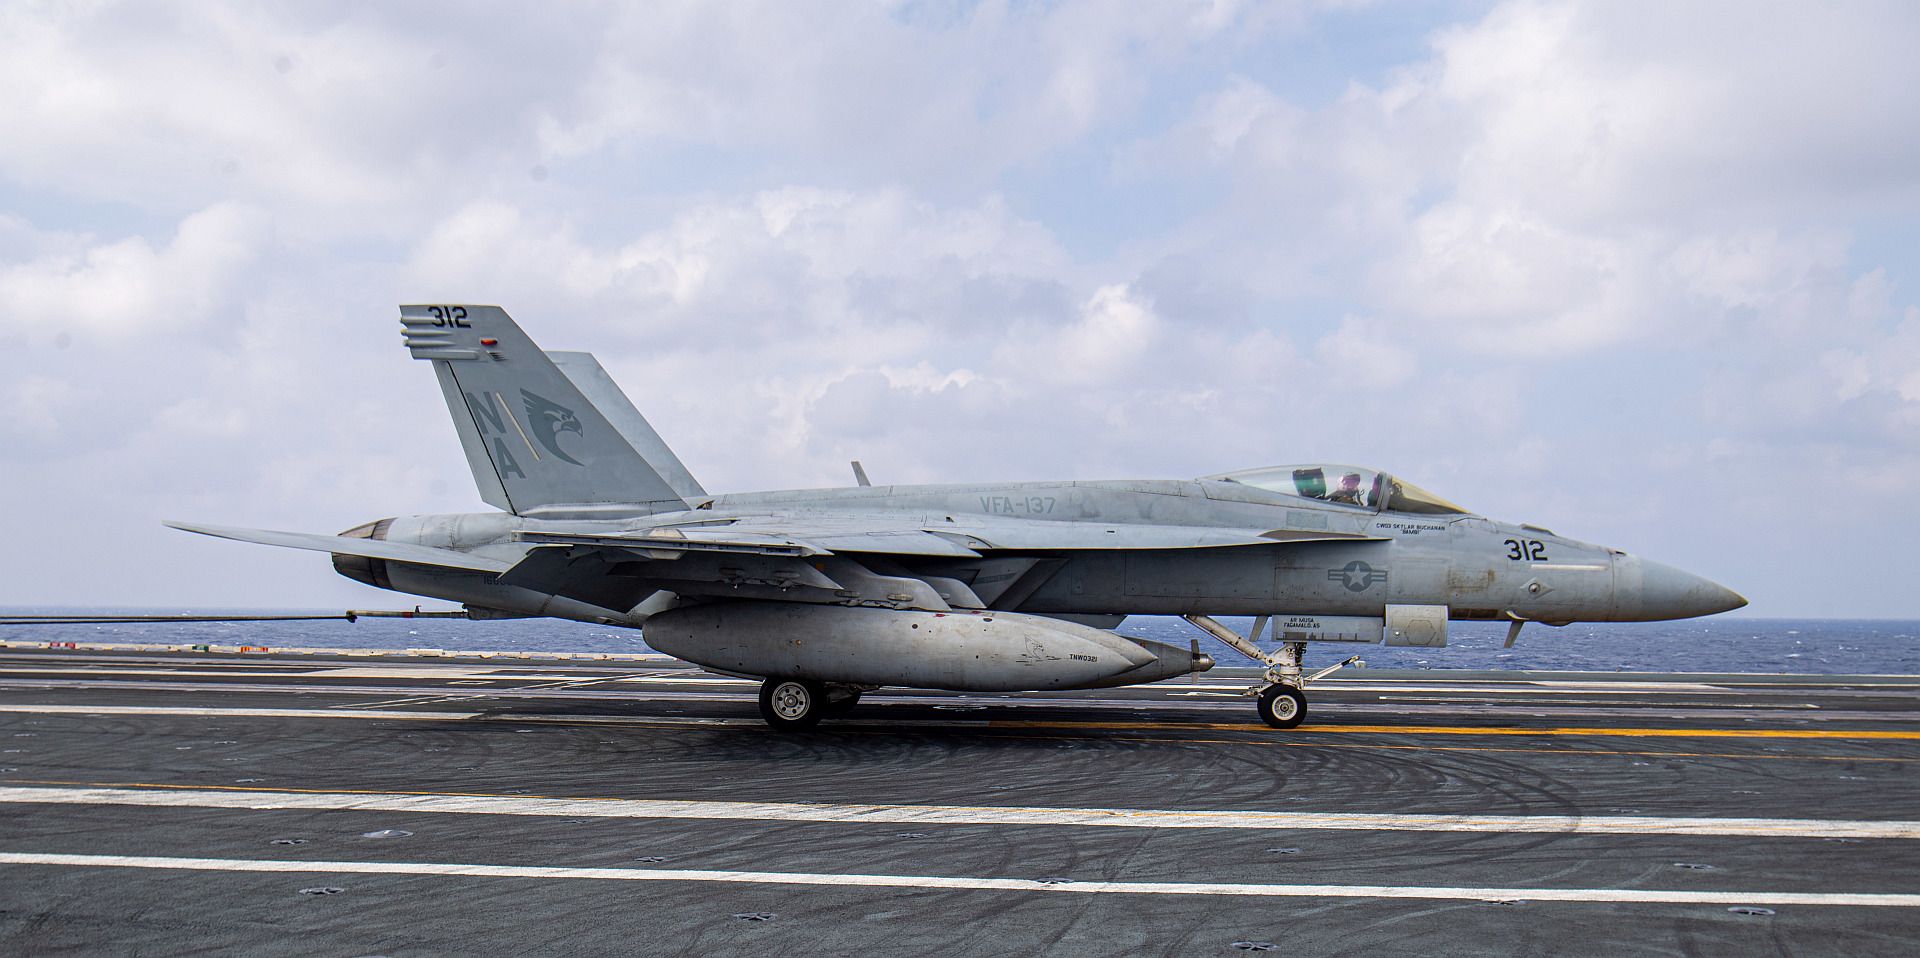 18E Super Hornet From The Kestrels Of Strike Fighter Squadron 137 Makes An Arrested Landing On The Aircraft Carrier USS Nimitz